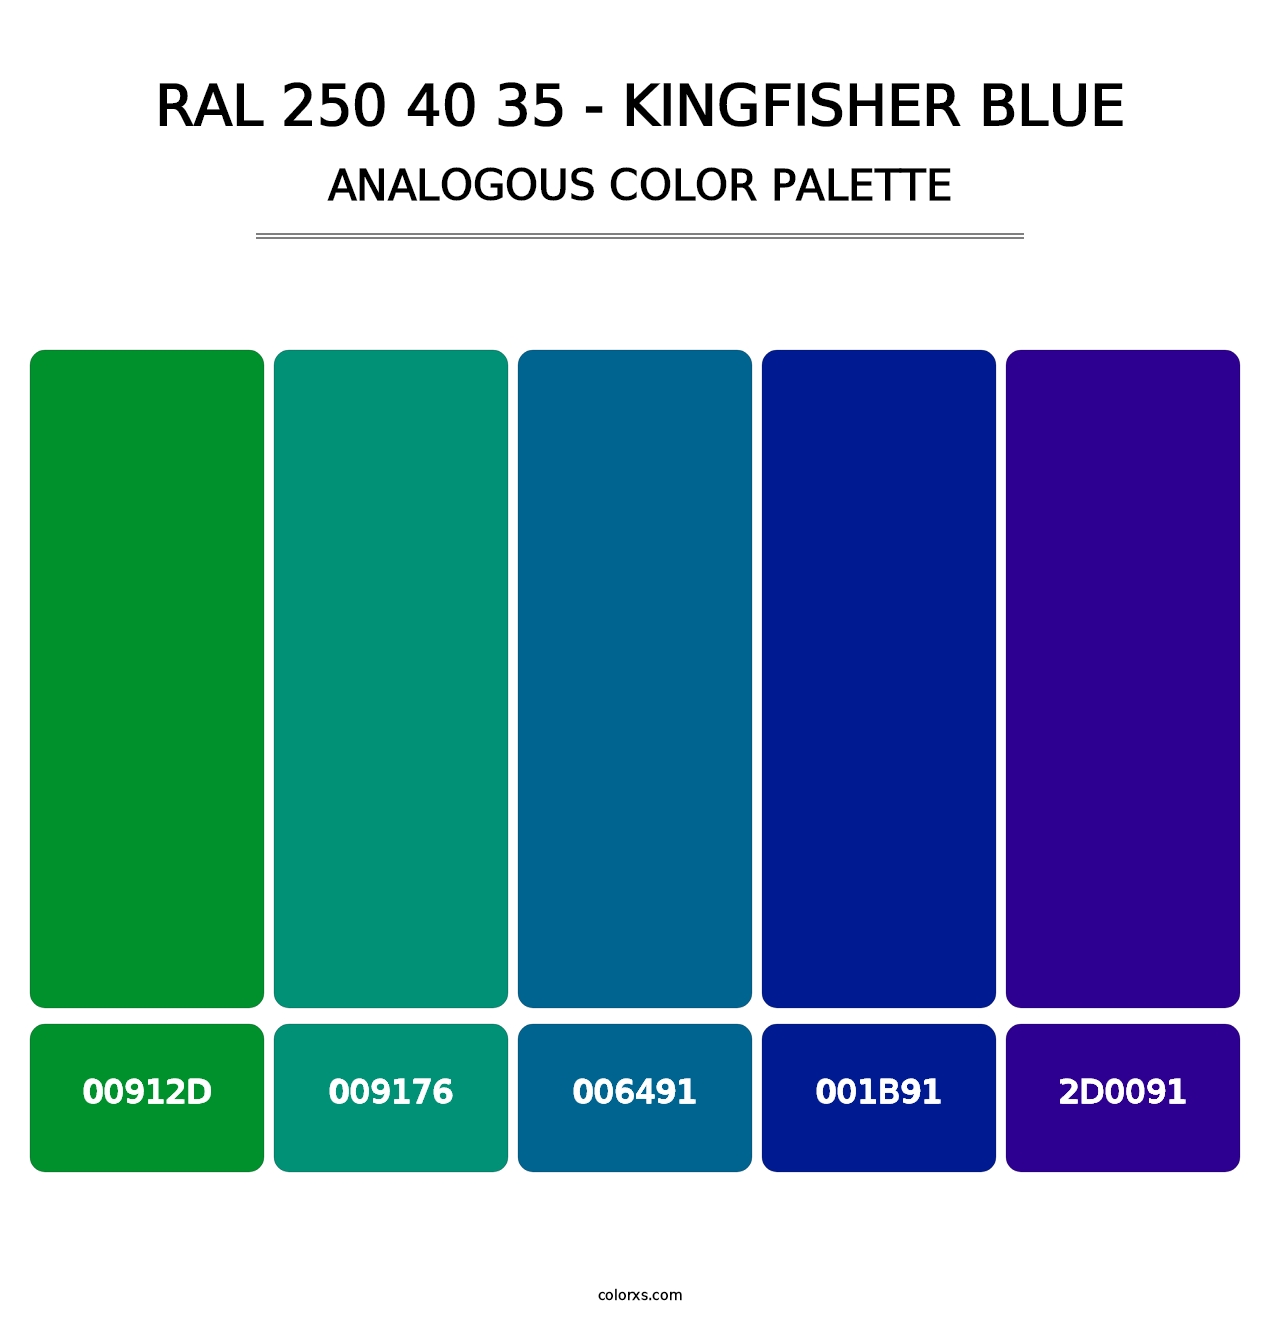 RAL 250 40 35 - Kingfisher Blue - Analogous Color Palette